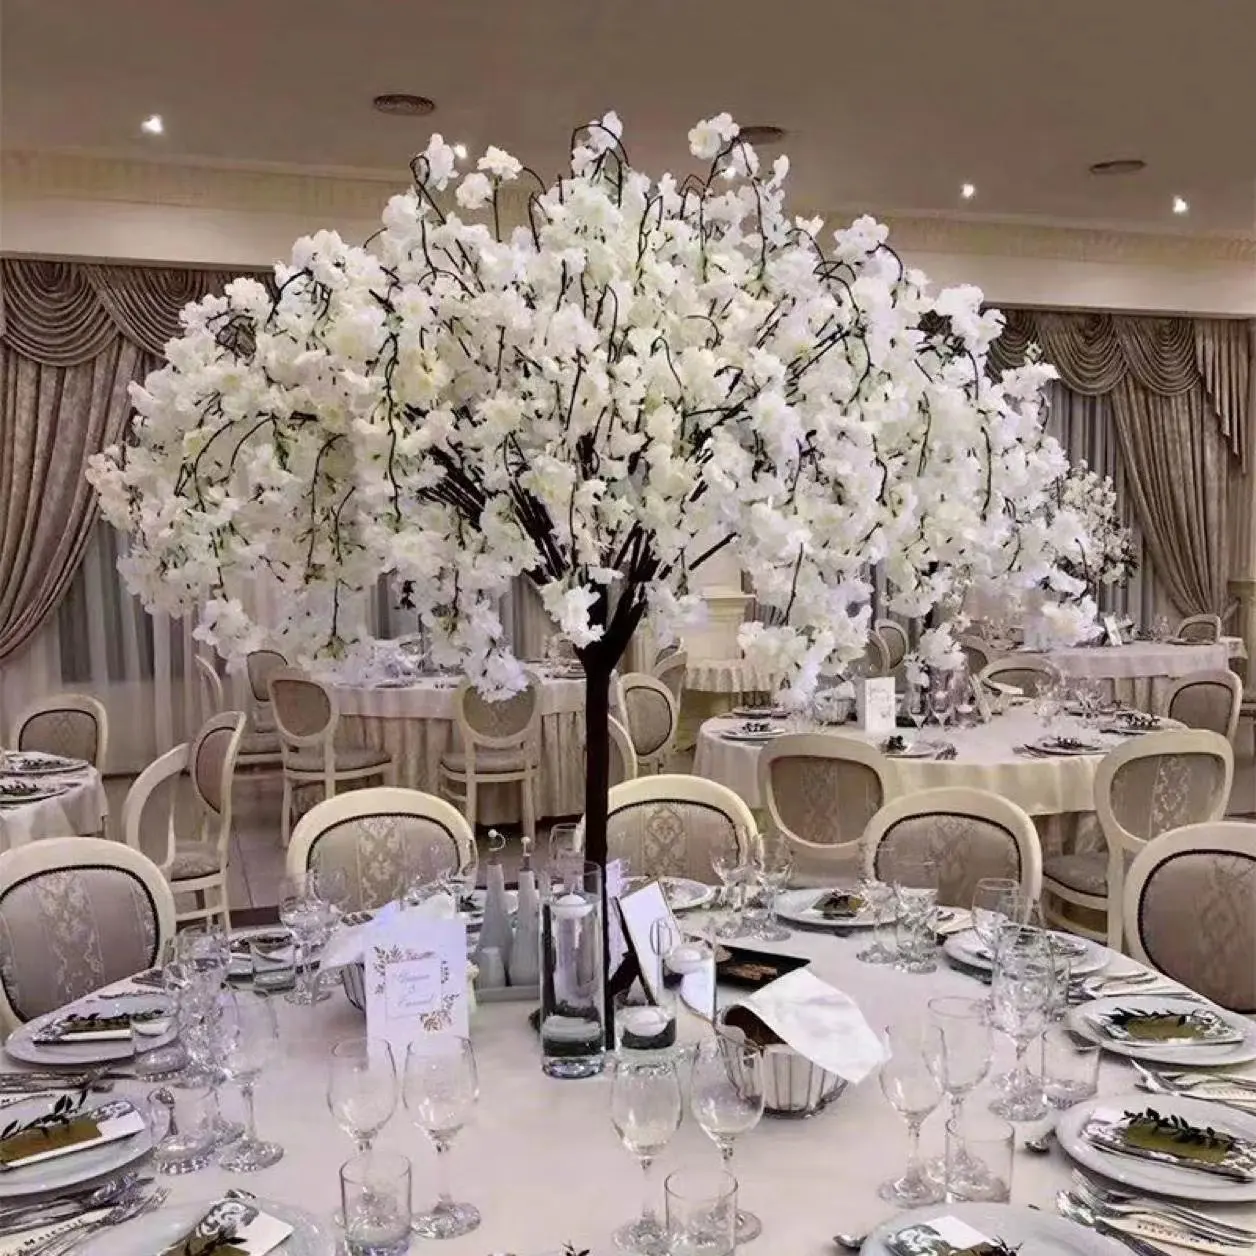 O-X502 Wedding Events Decorations Table Tree White Pink Artificial Cherry Blossom Tree Indoor Outdoor 5ft Cherry Blossom Tree